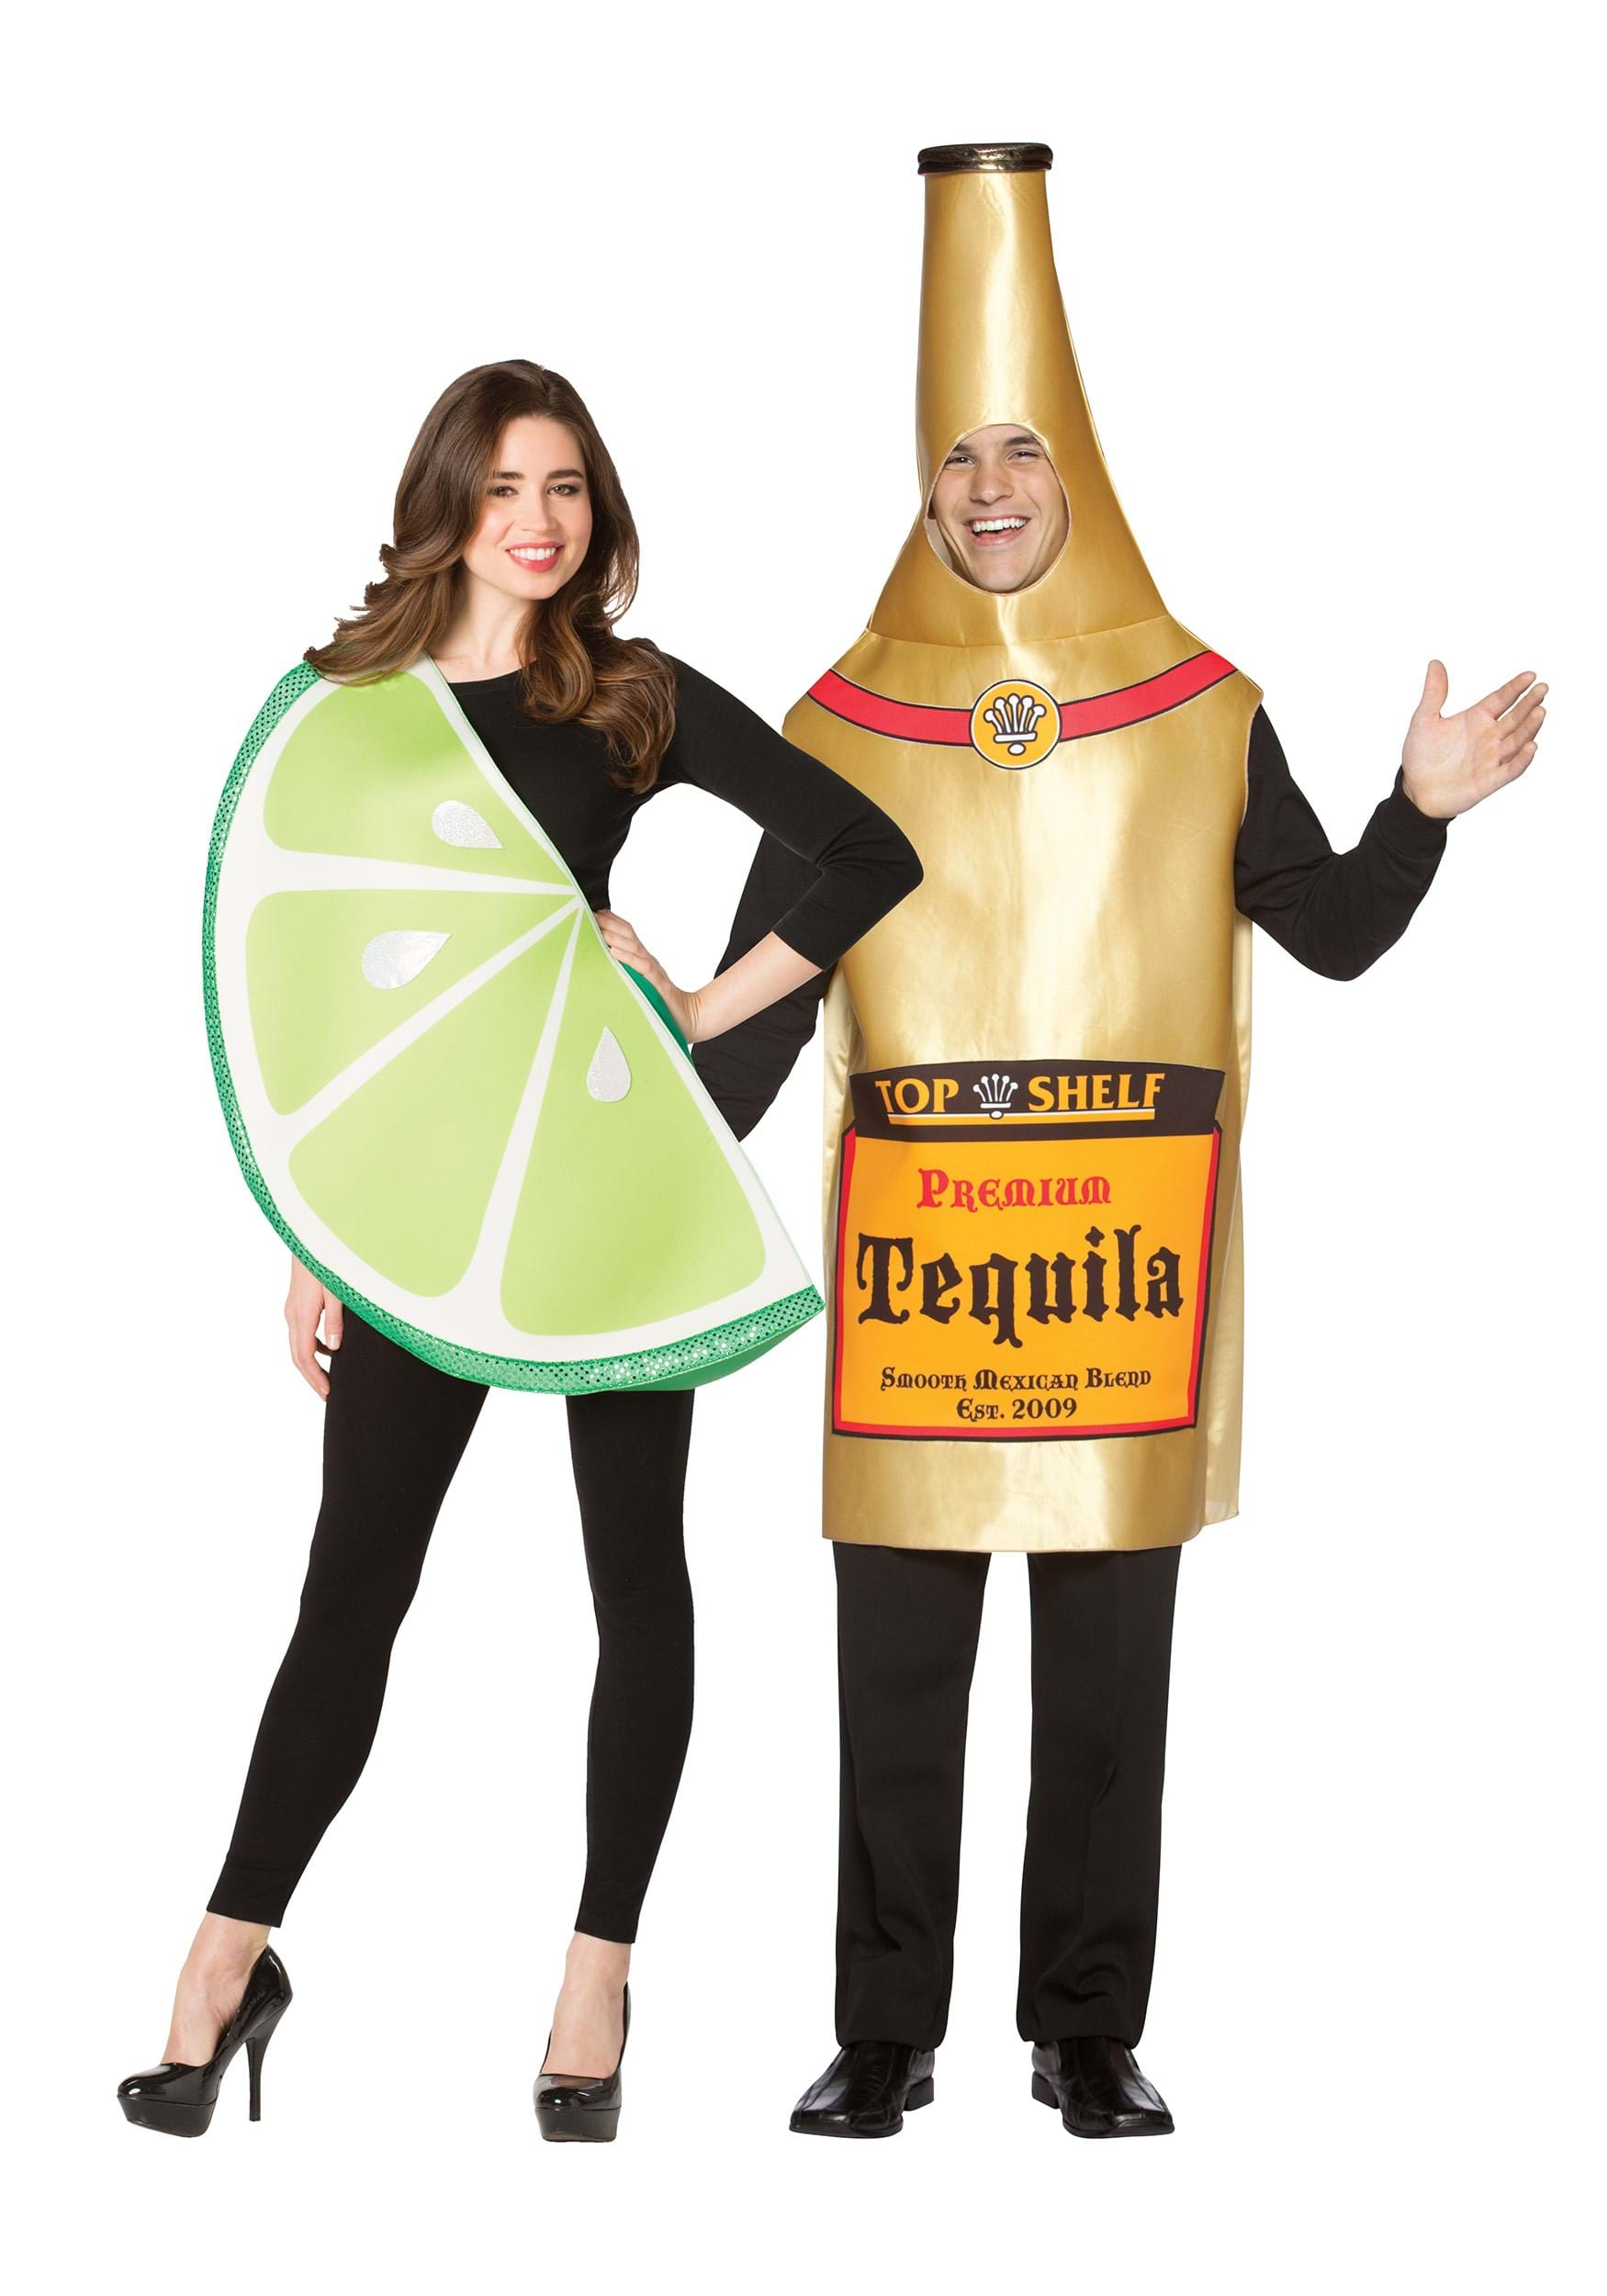 Photos - Fancy Dress Morris Costumes Tequila Bottle and Lime Slice Costume for Couples Green 